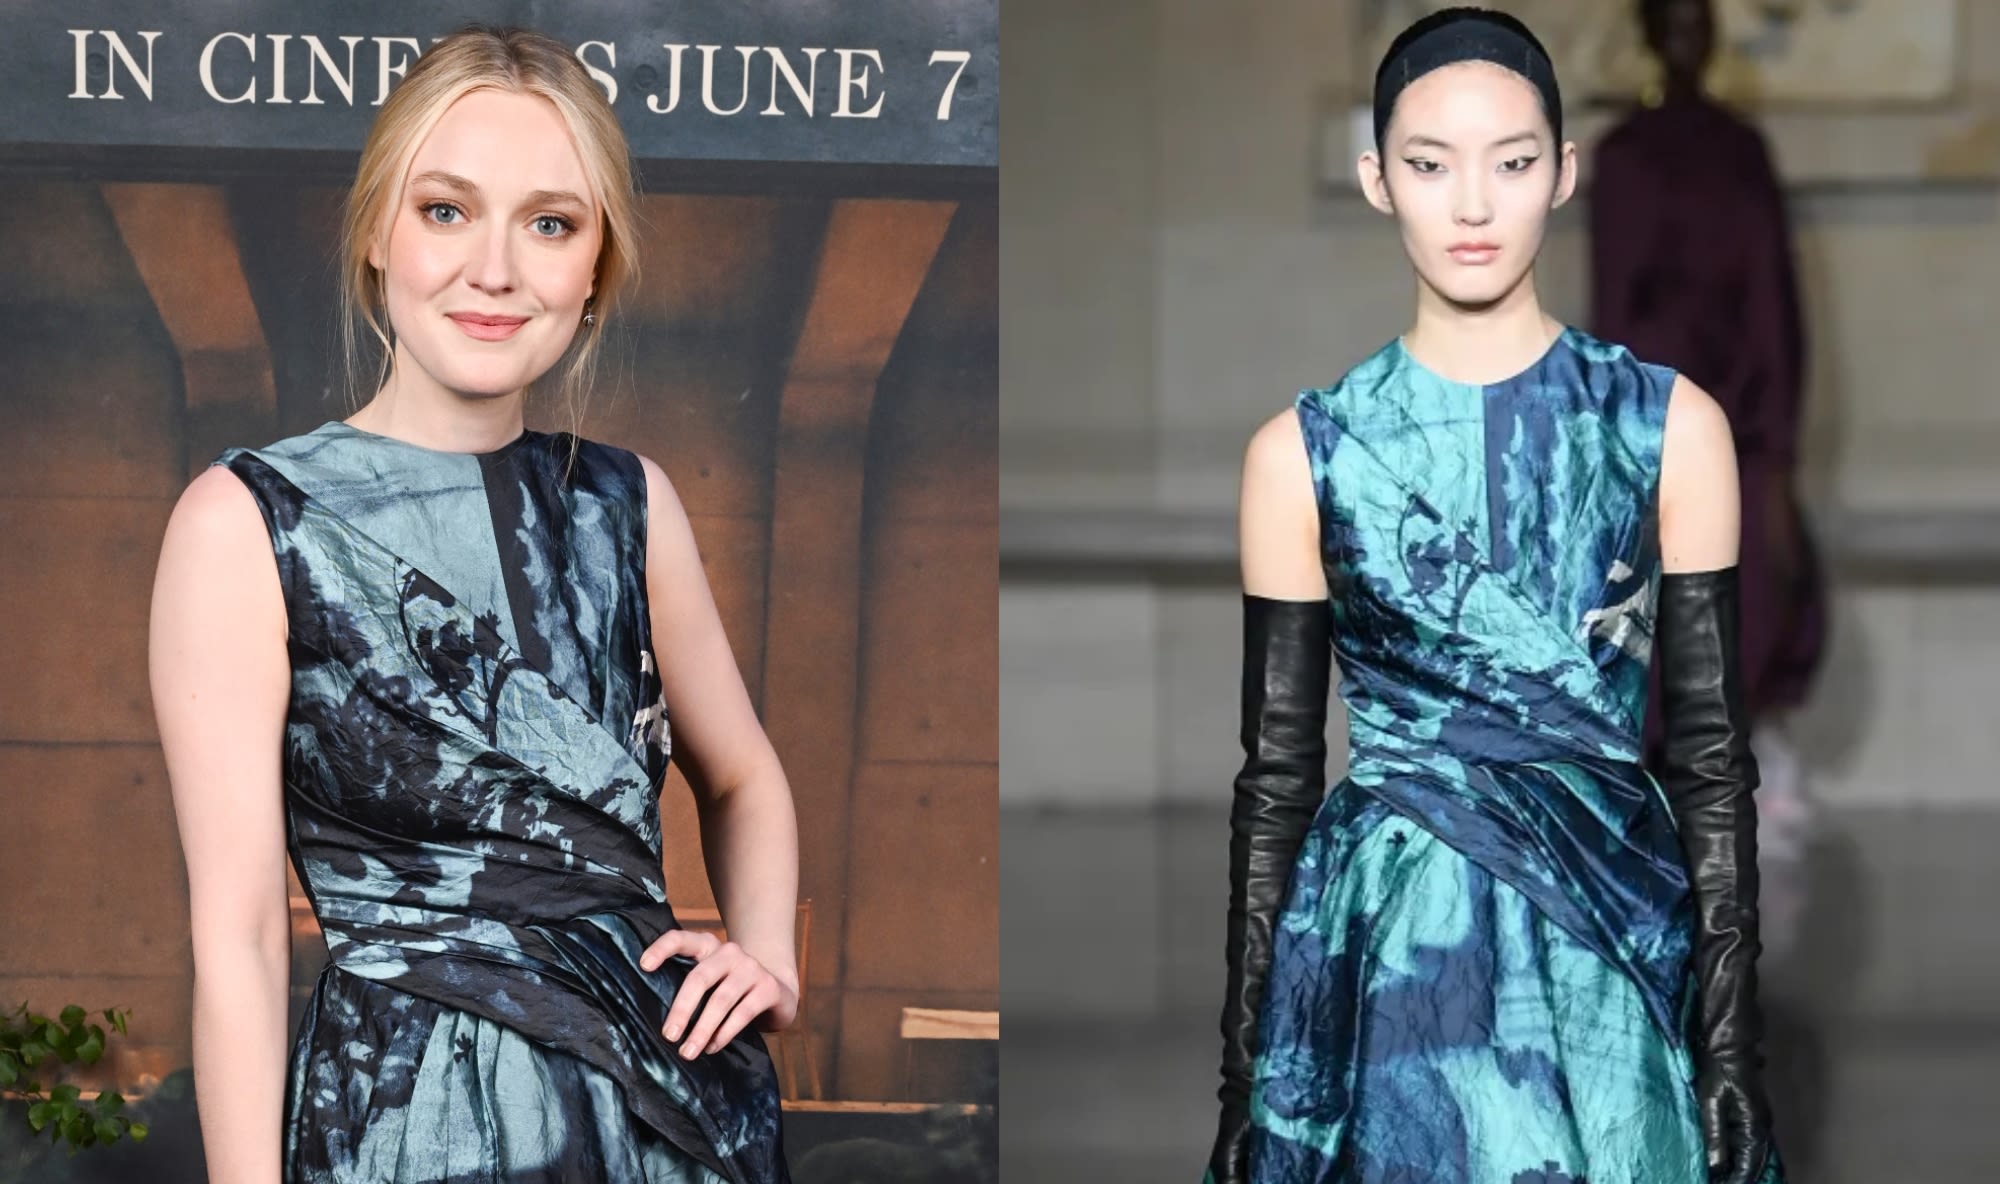 Dakota Fanning Hits High Notes in Erdem Dress Inspired by World-famous Opera Singer at ‘The Watchers’ Red Carpet London Screening